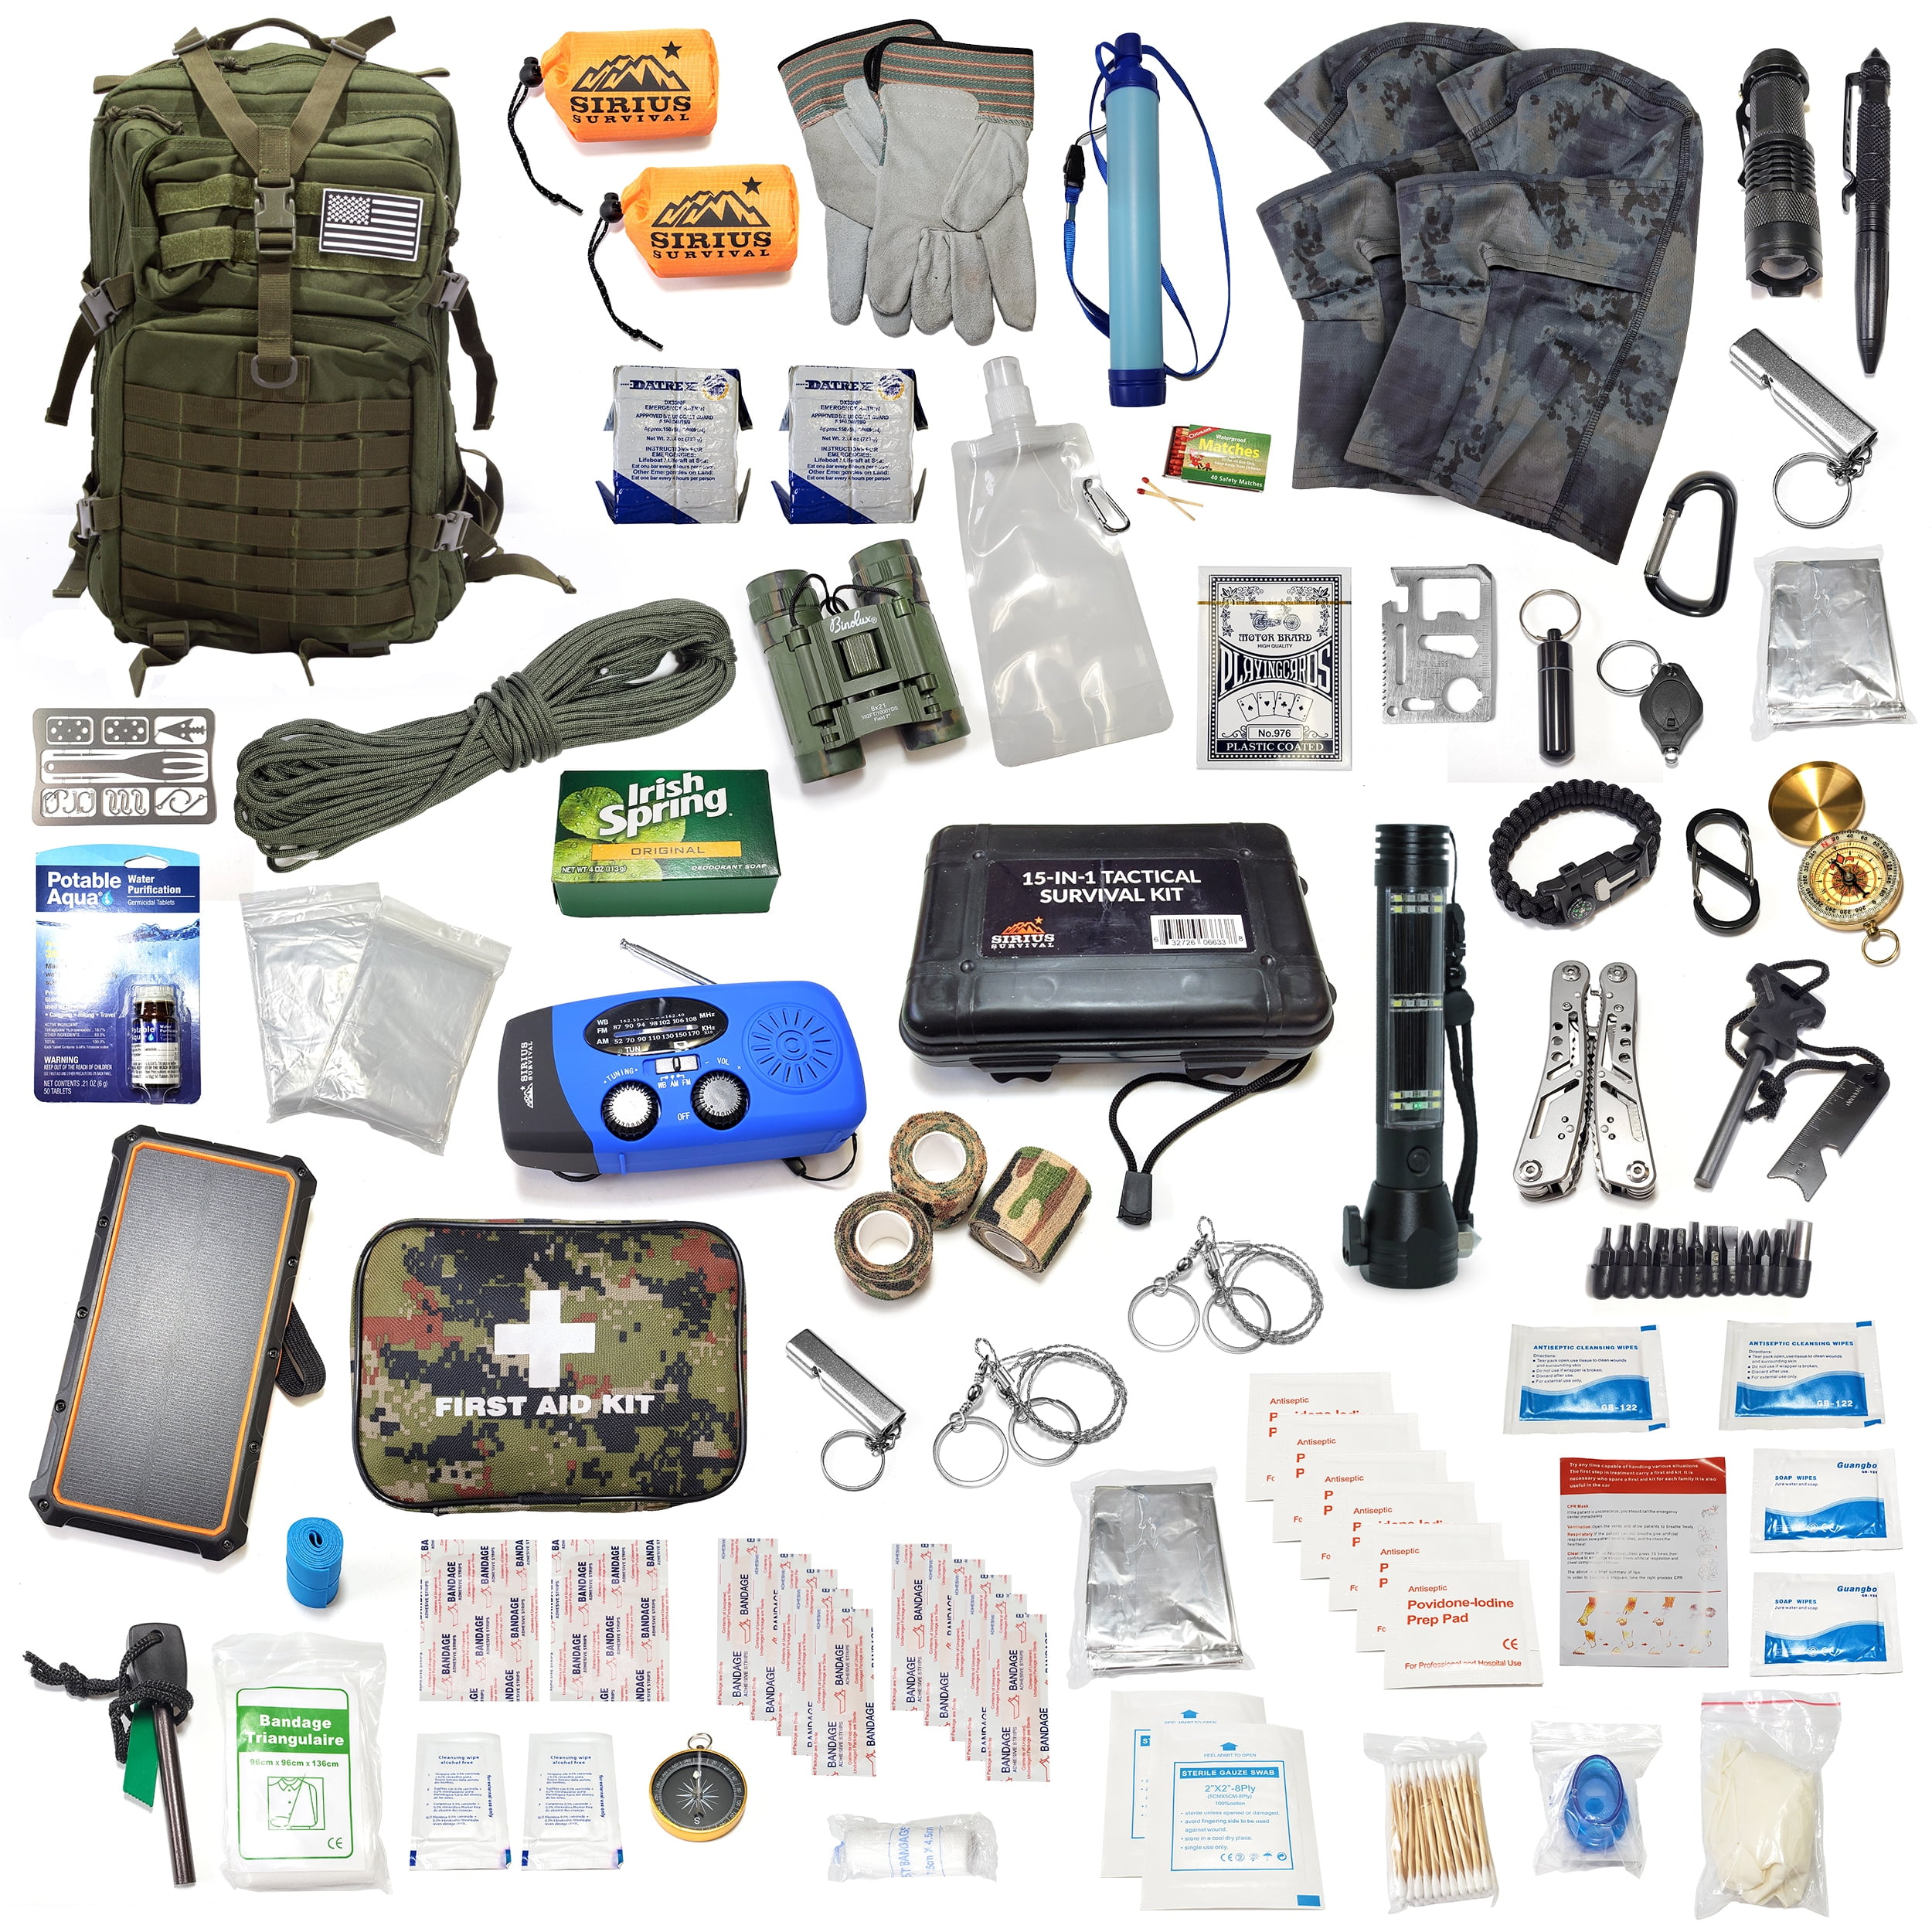 The 10 Best Bug-Out Bags to Prep for Survival - The Manual